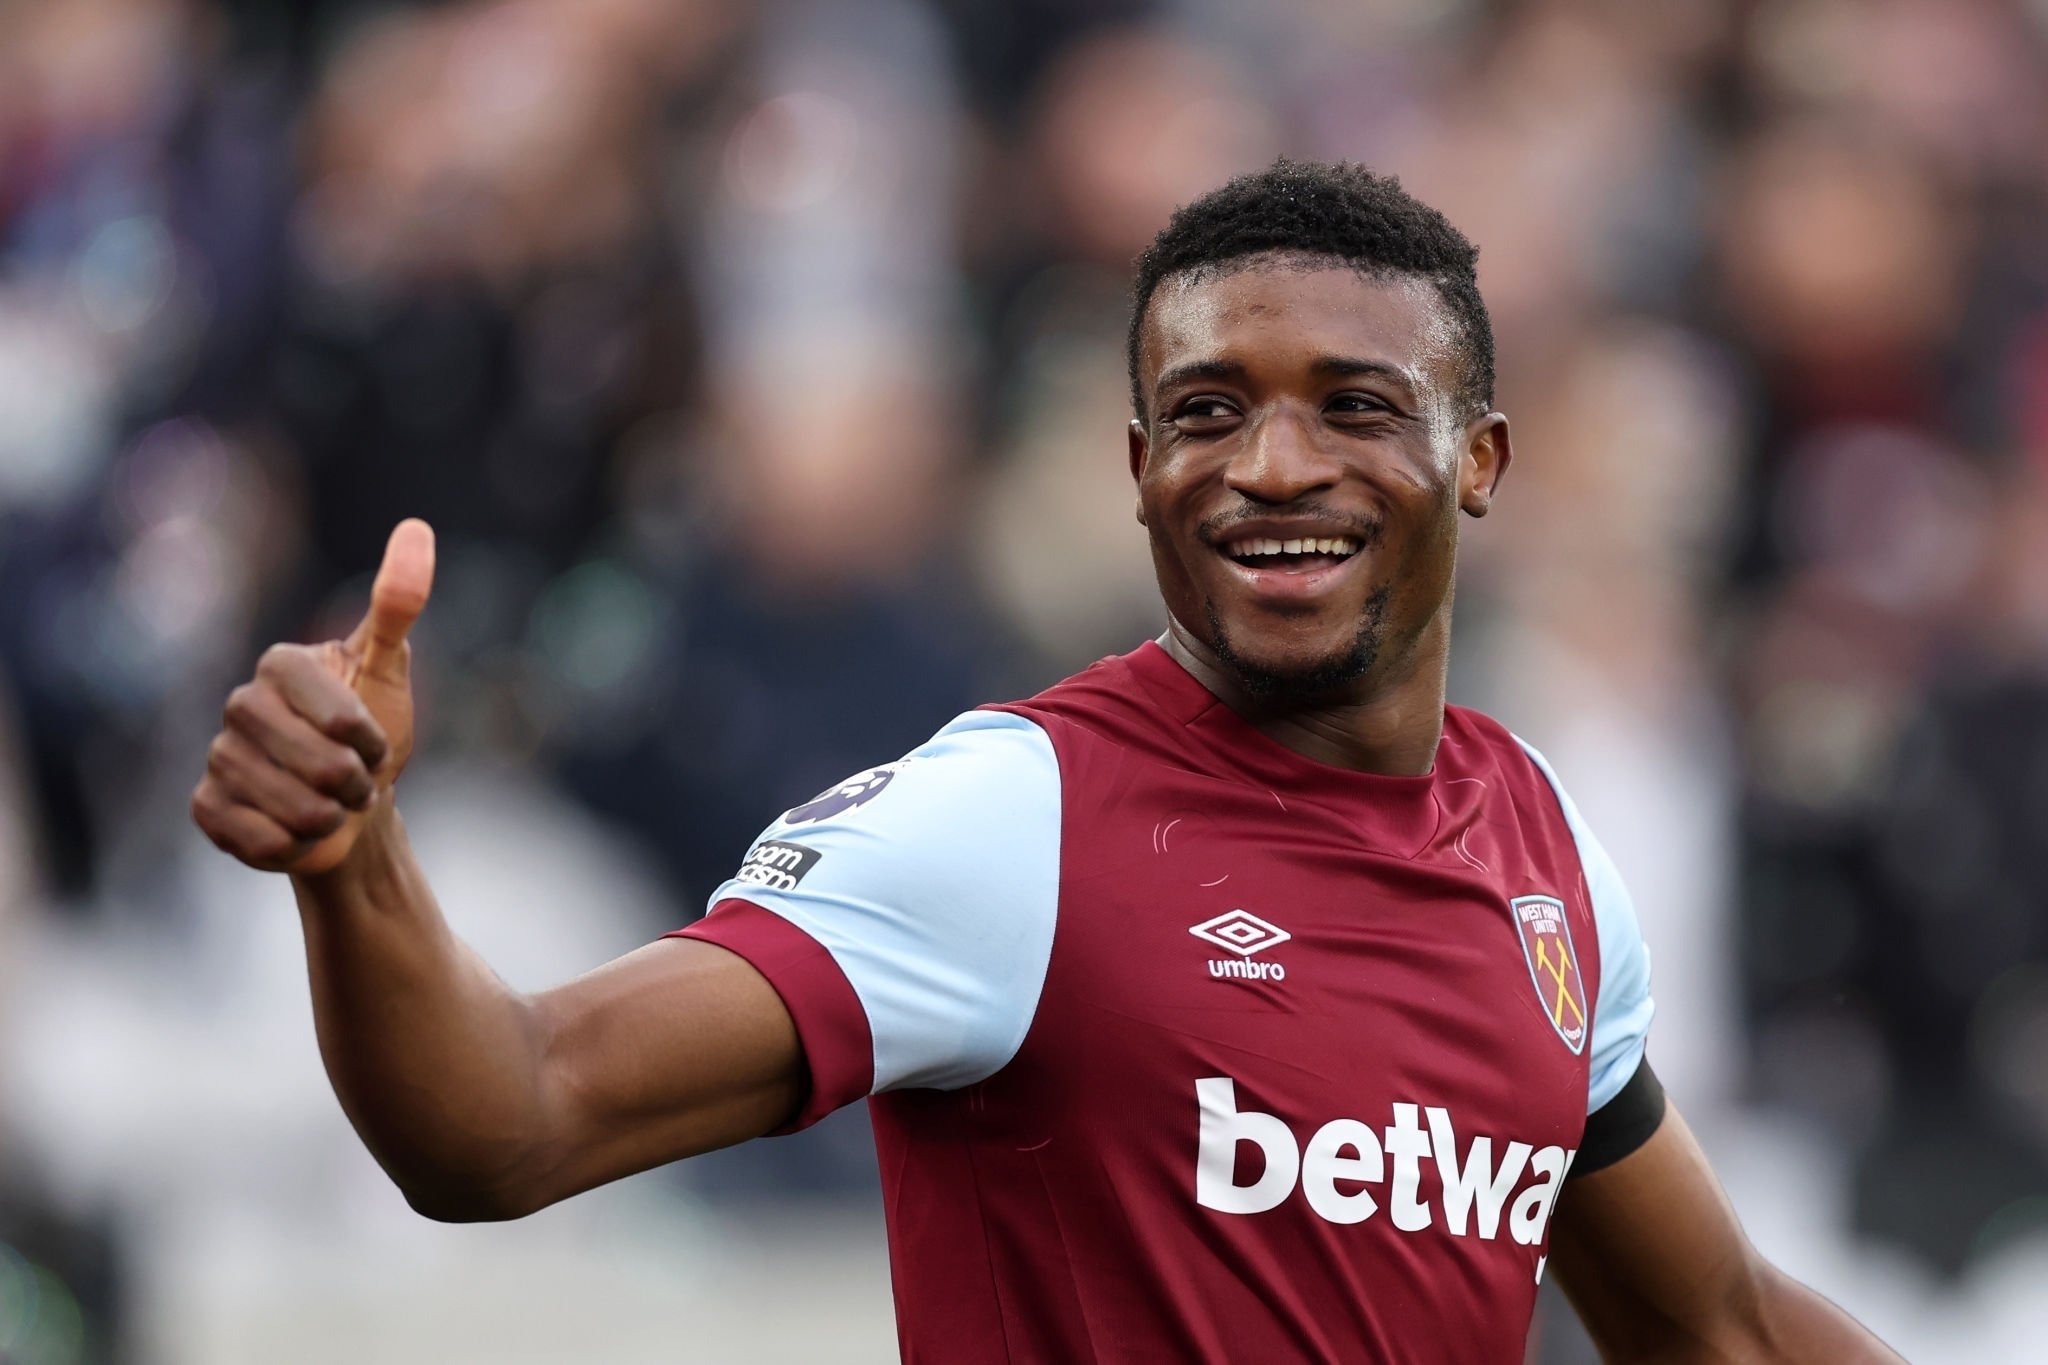 Ghana midfielder Mohammed Kudus scores as West Ham draw against Crystal Palace